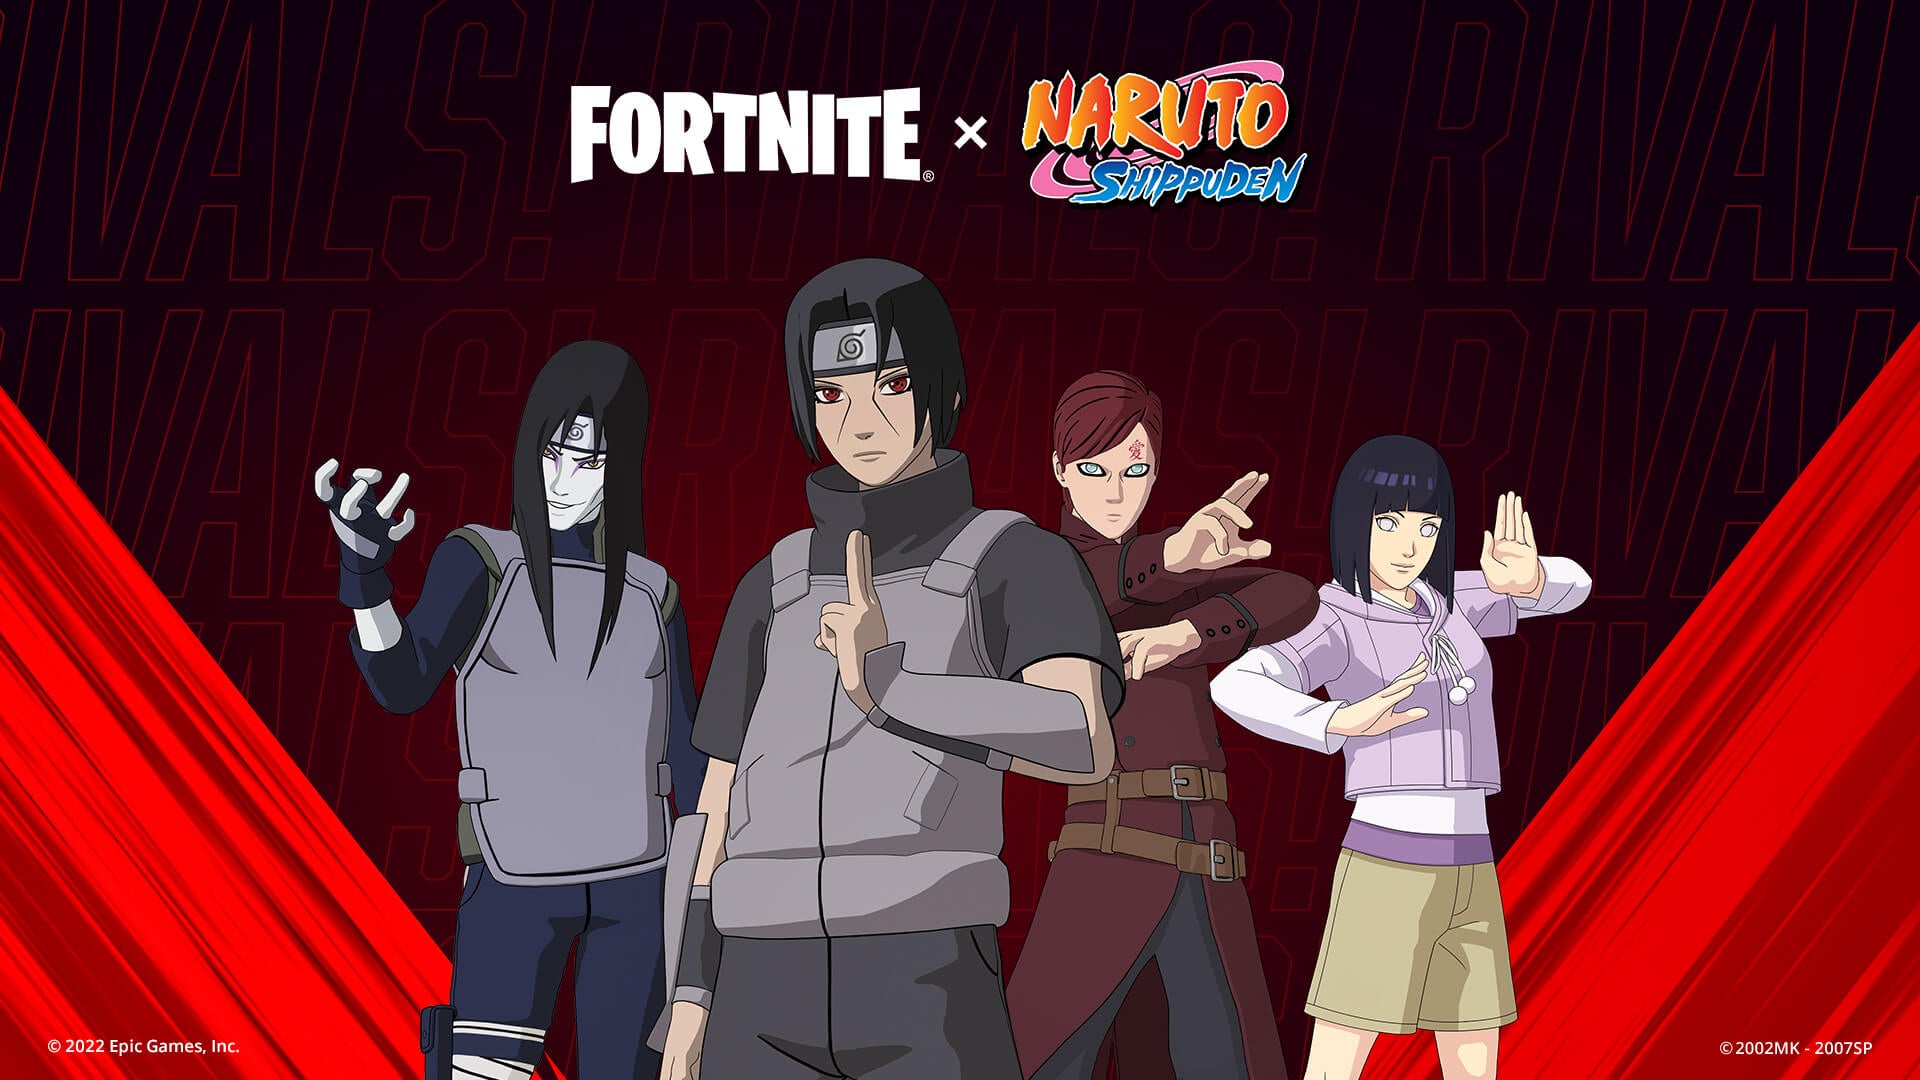 Naruto's rivals standing against a red and black backdrop